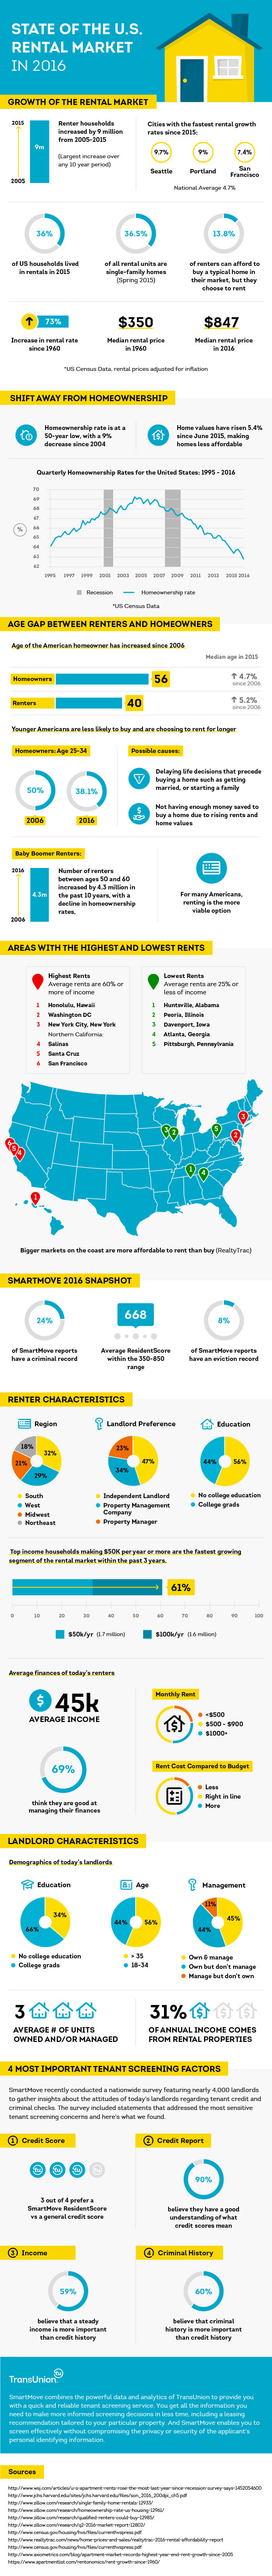 State Of The U.S. Rental Market in 2016